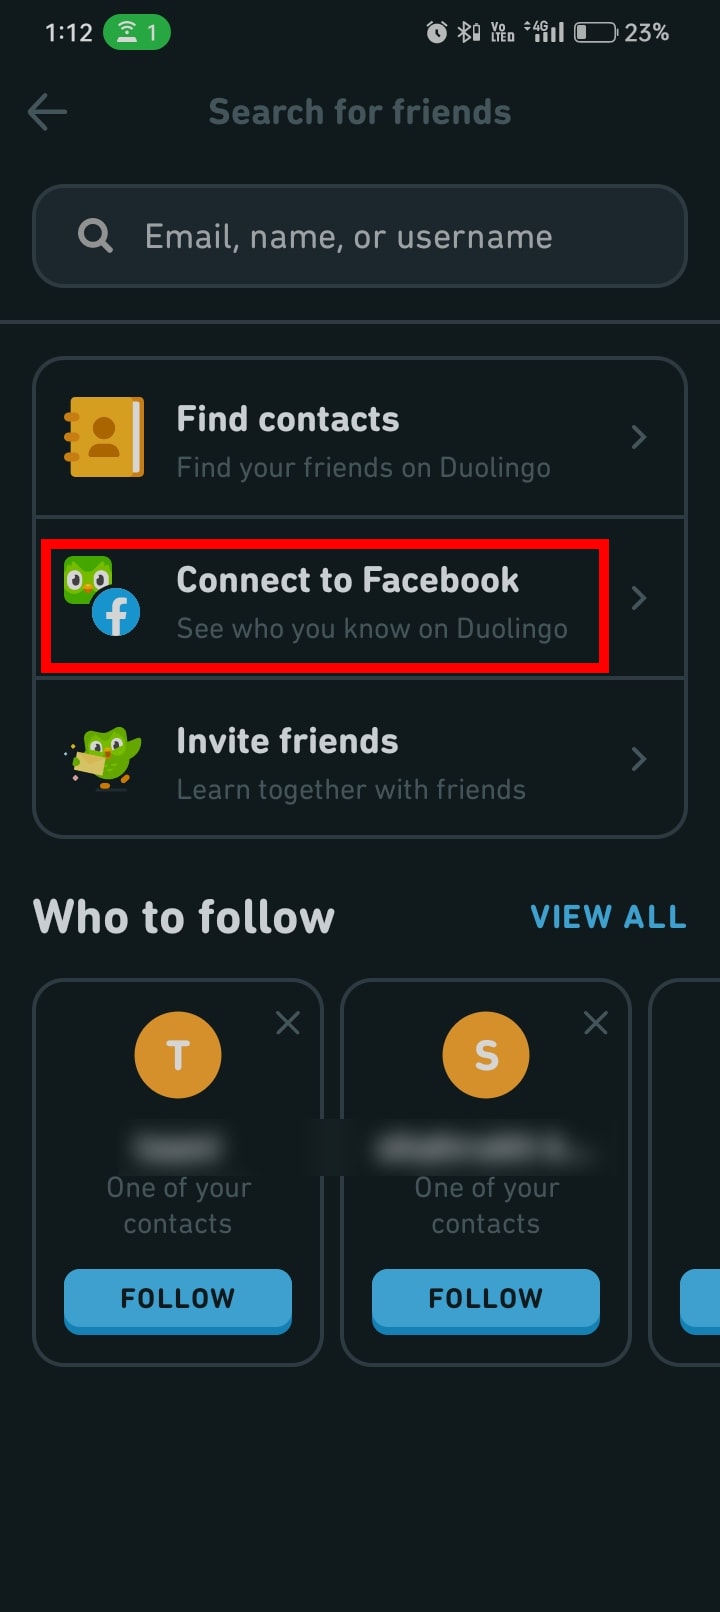 From the four options, tap on Connect to Facebook